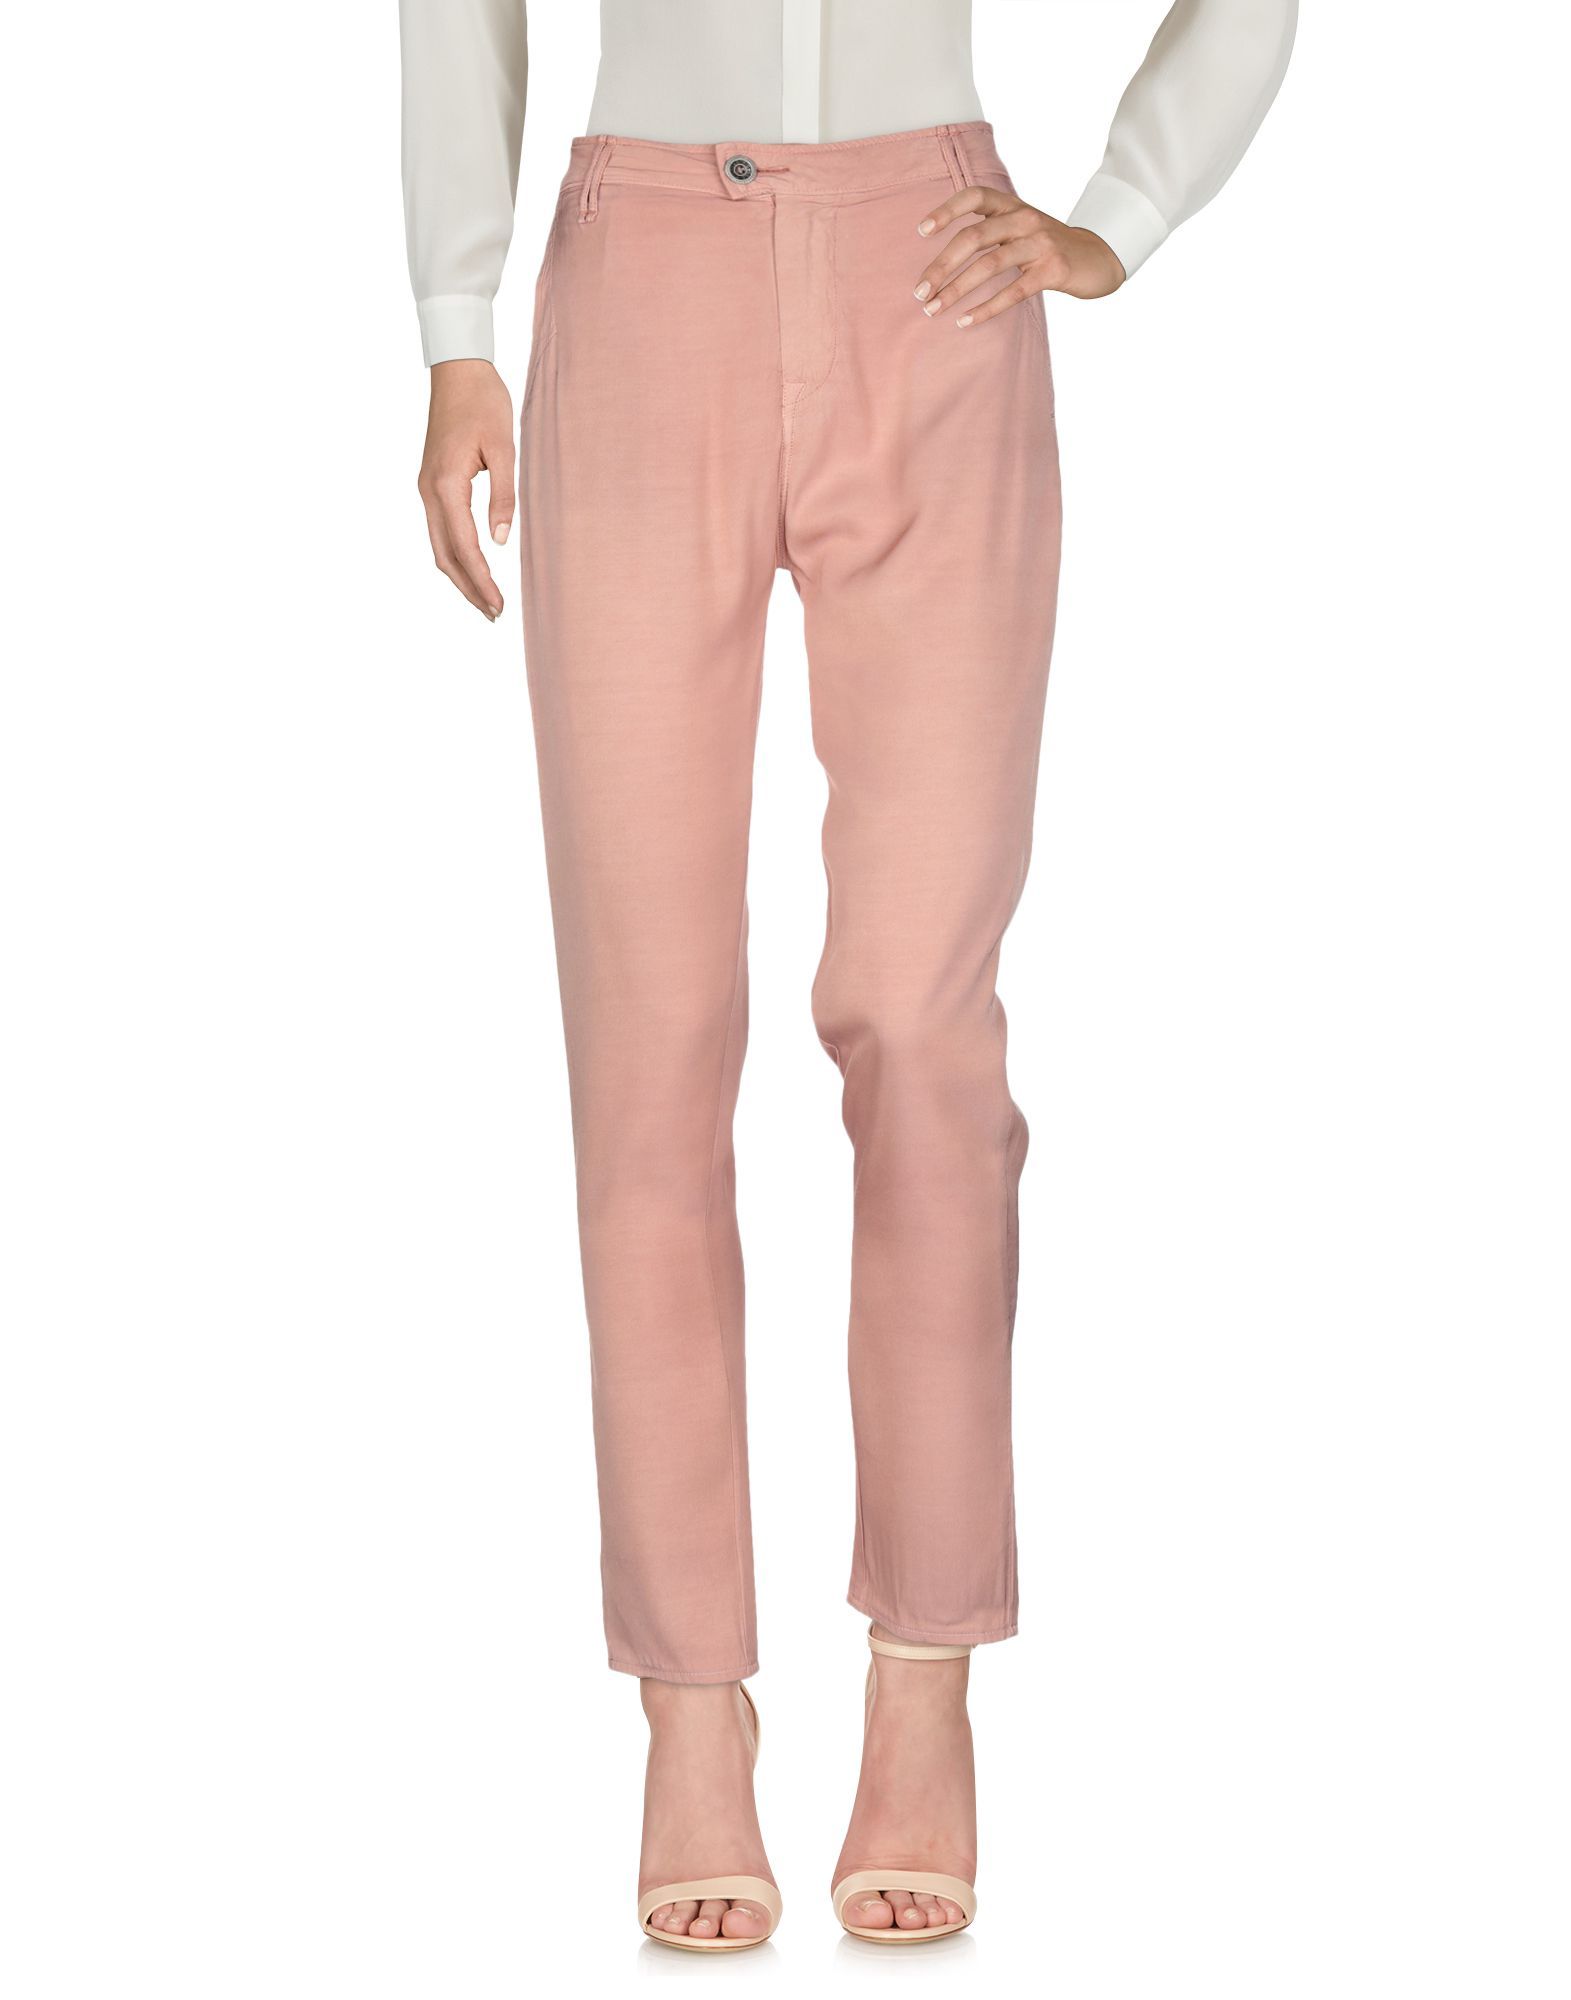 Trousers Women's Cycle Pastel Pink Viscose